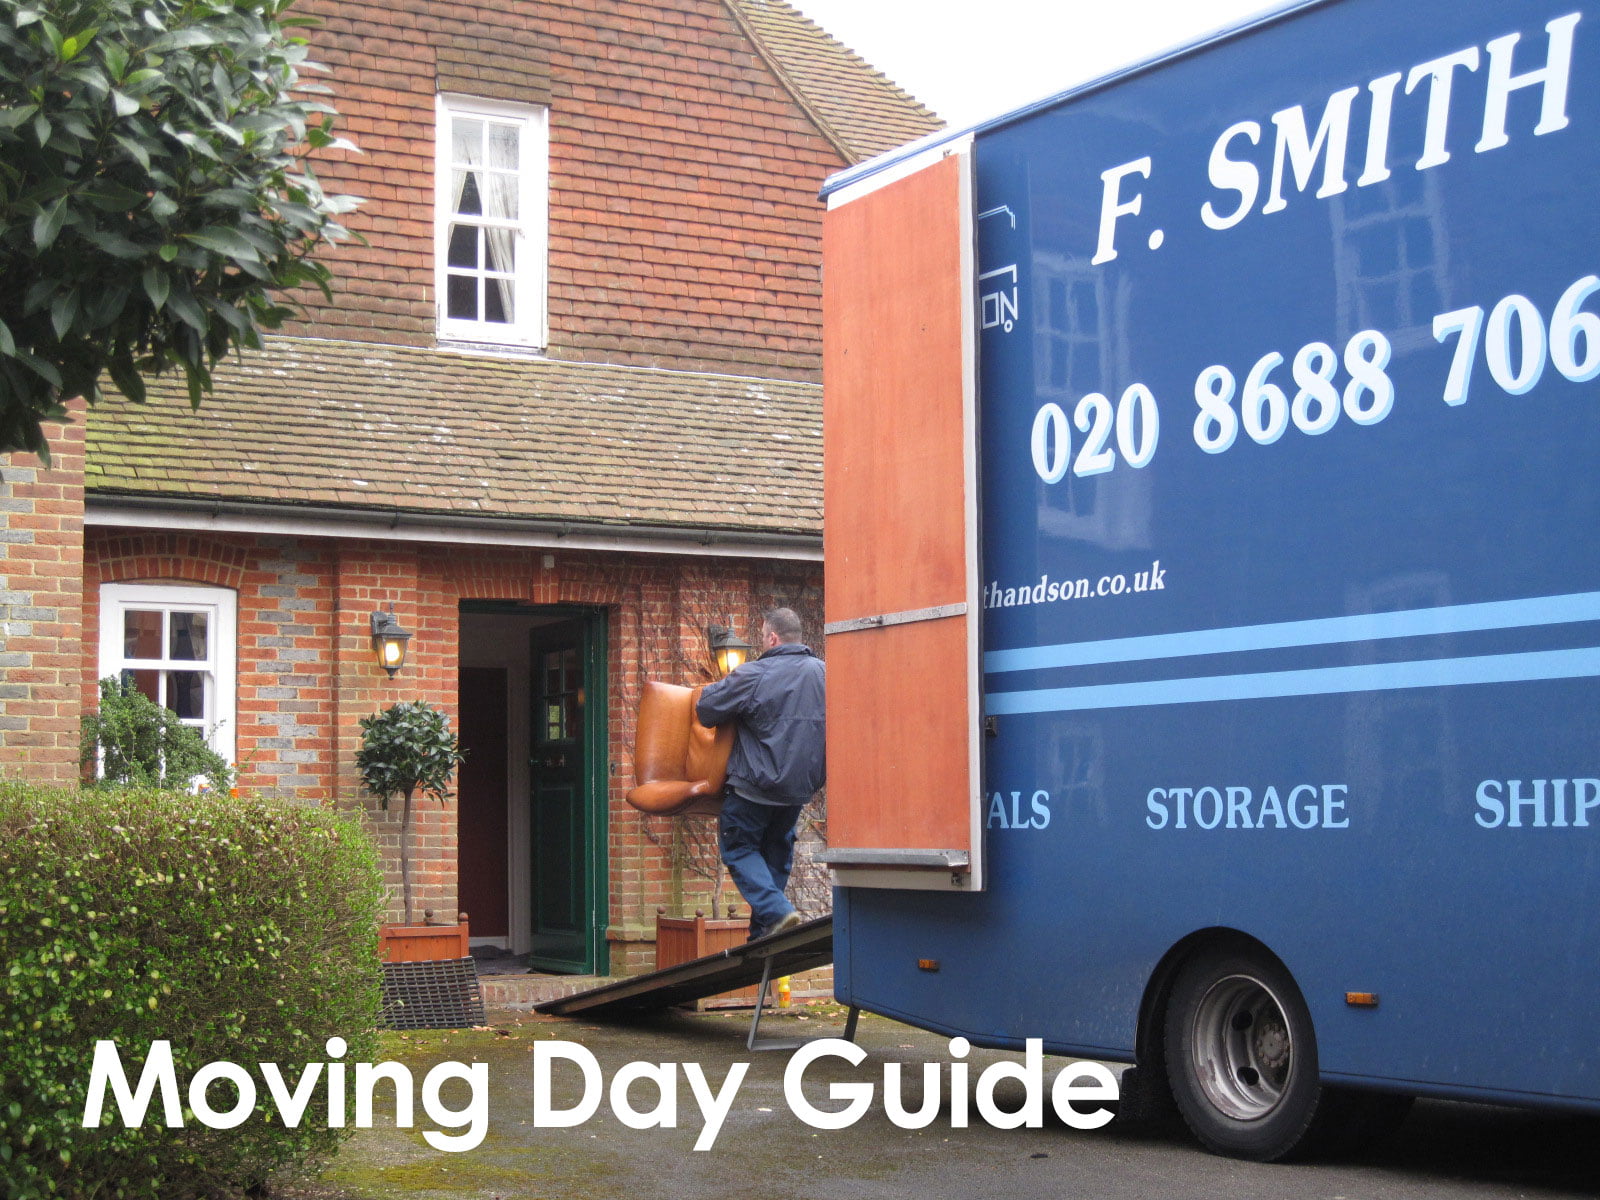 Moving Day Guide - F Smith & Son Removals & Storage Croydon London Surrey